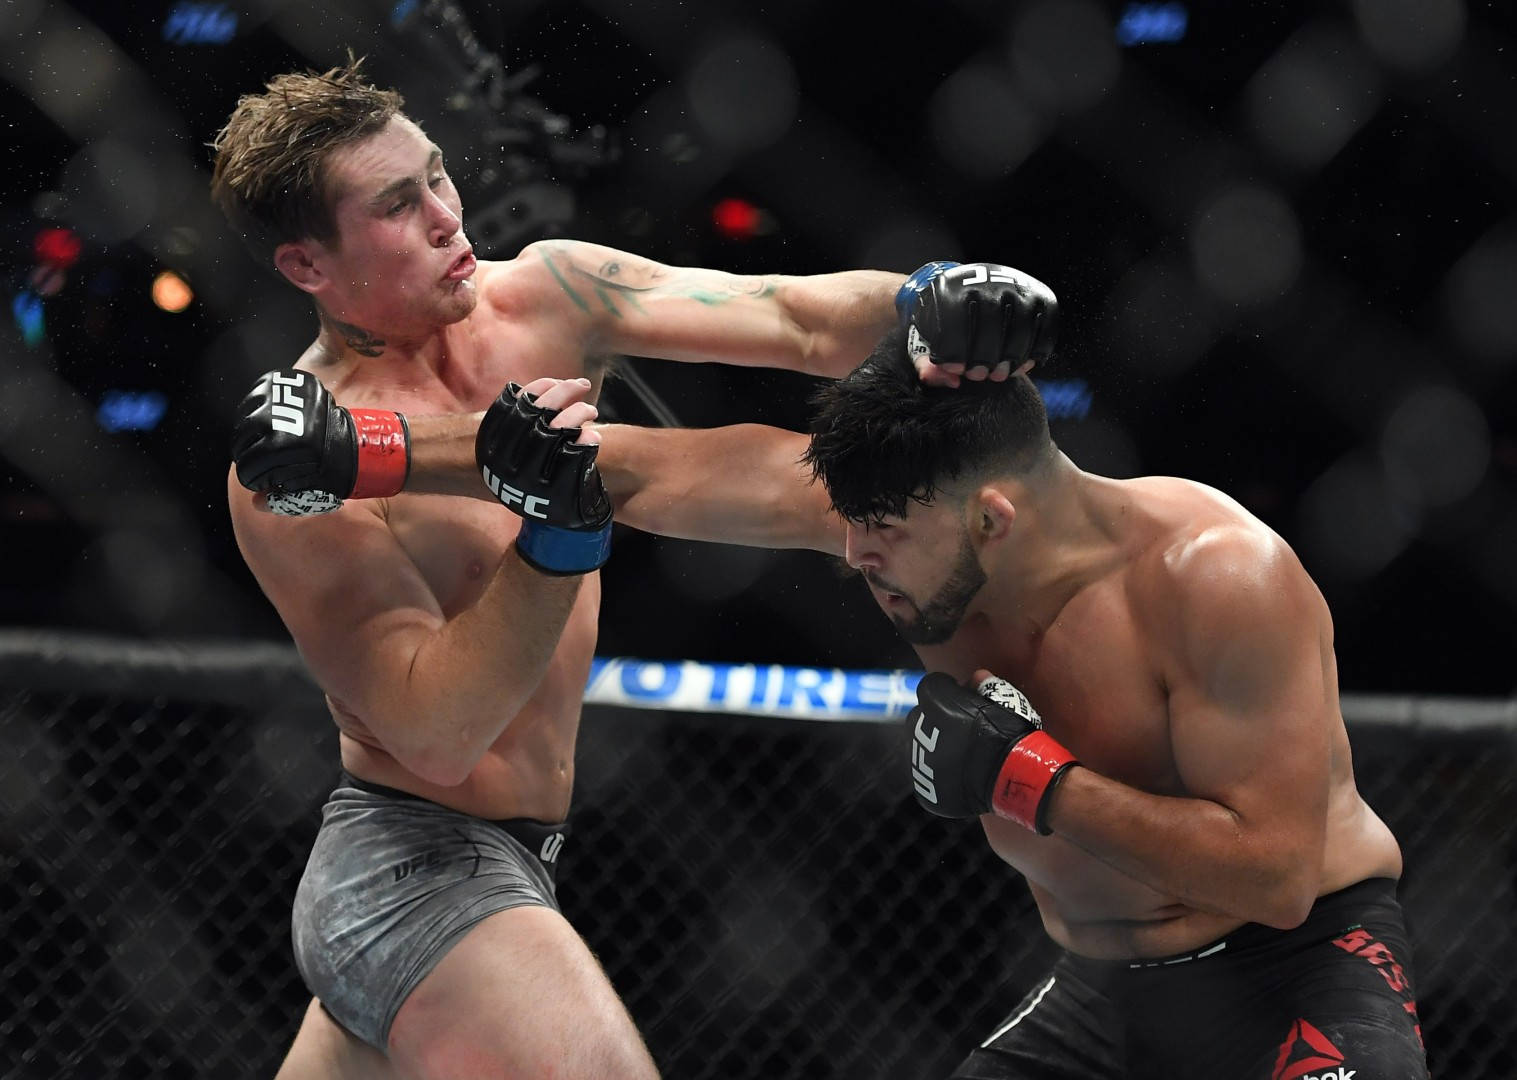 Astonished Darren Till in the middle of the fight Wallpaper